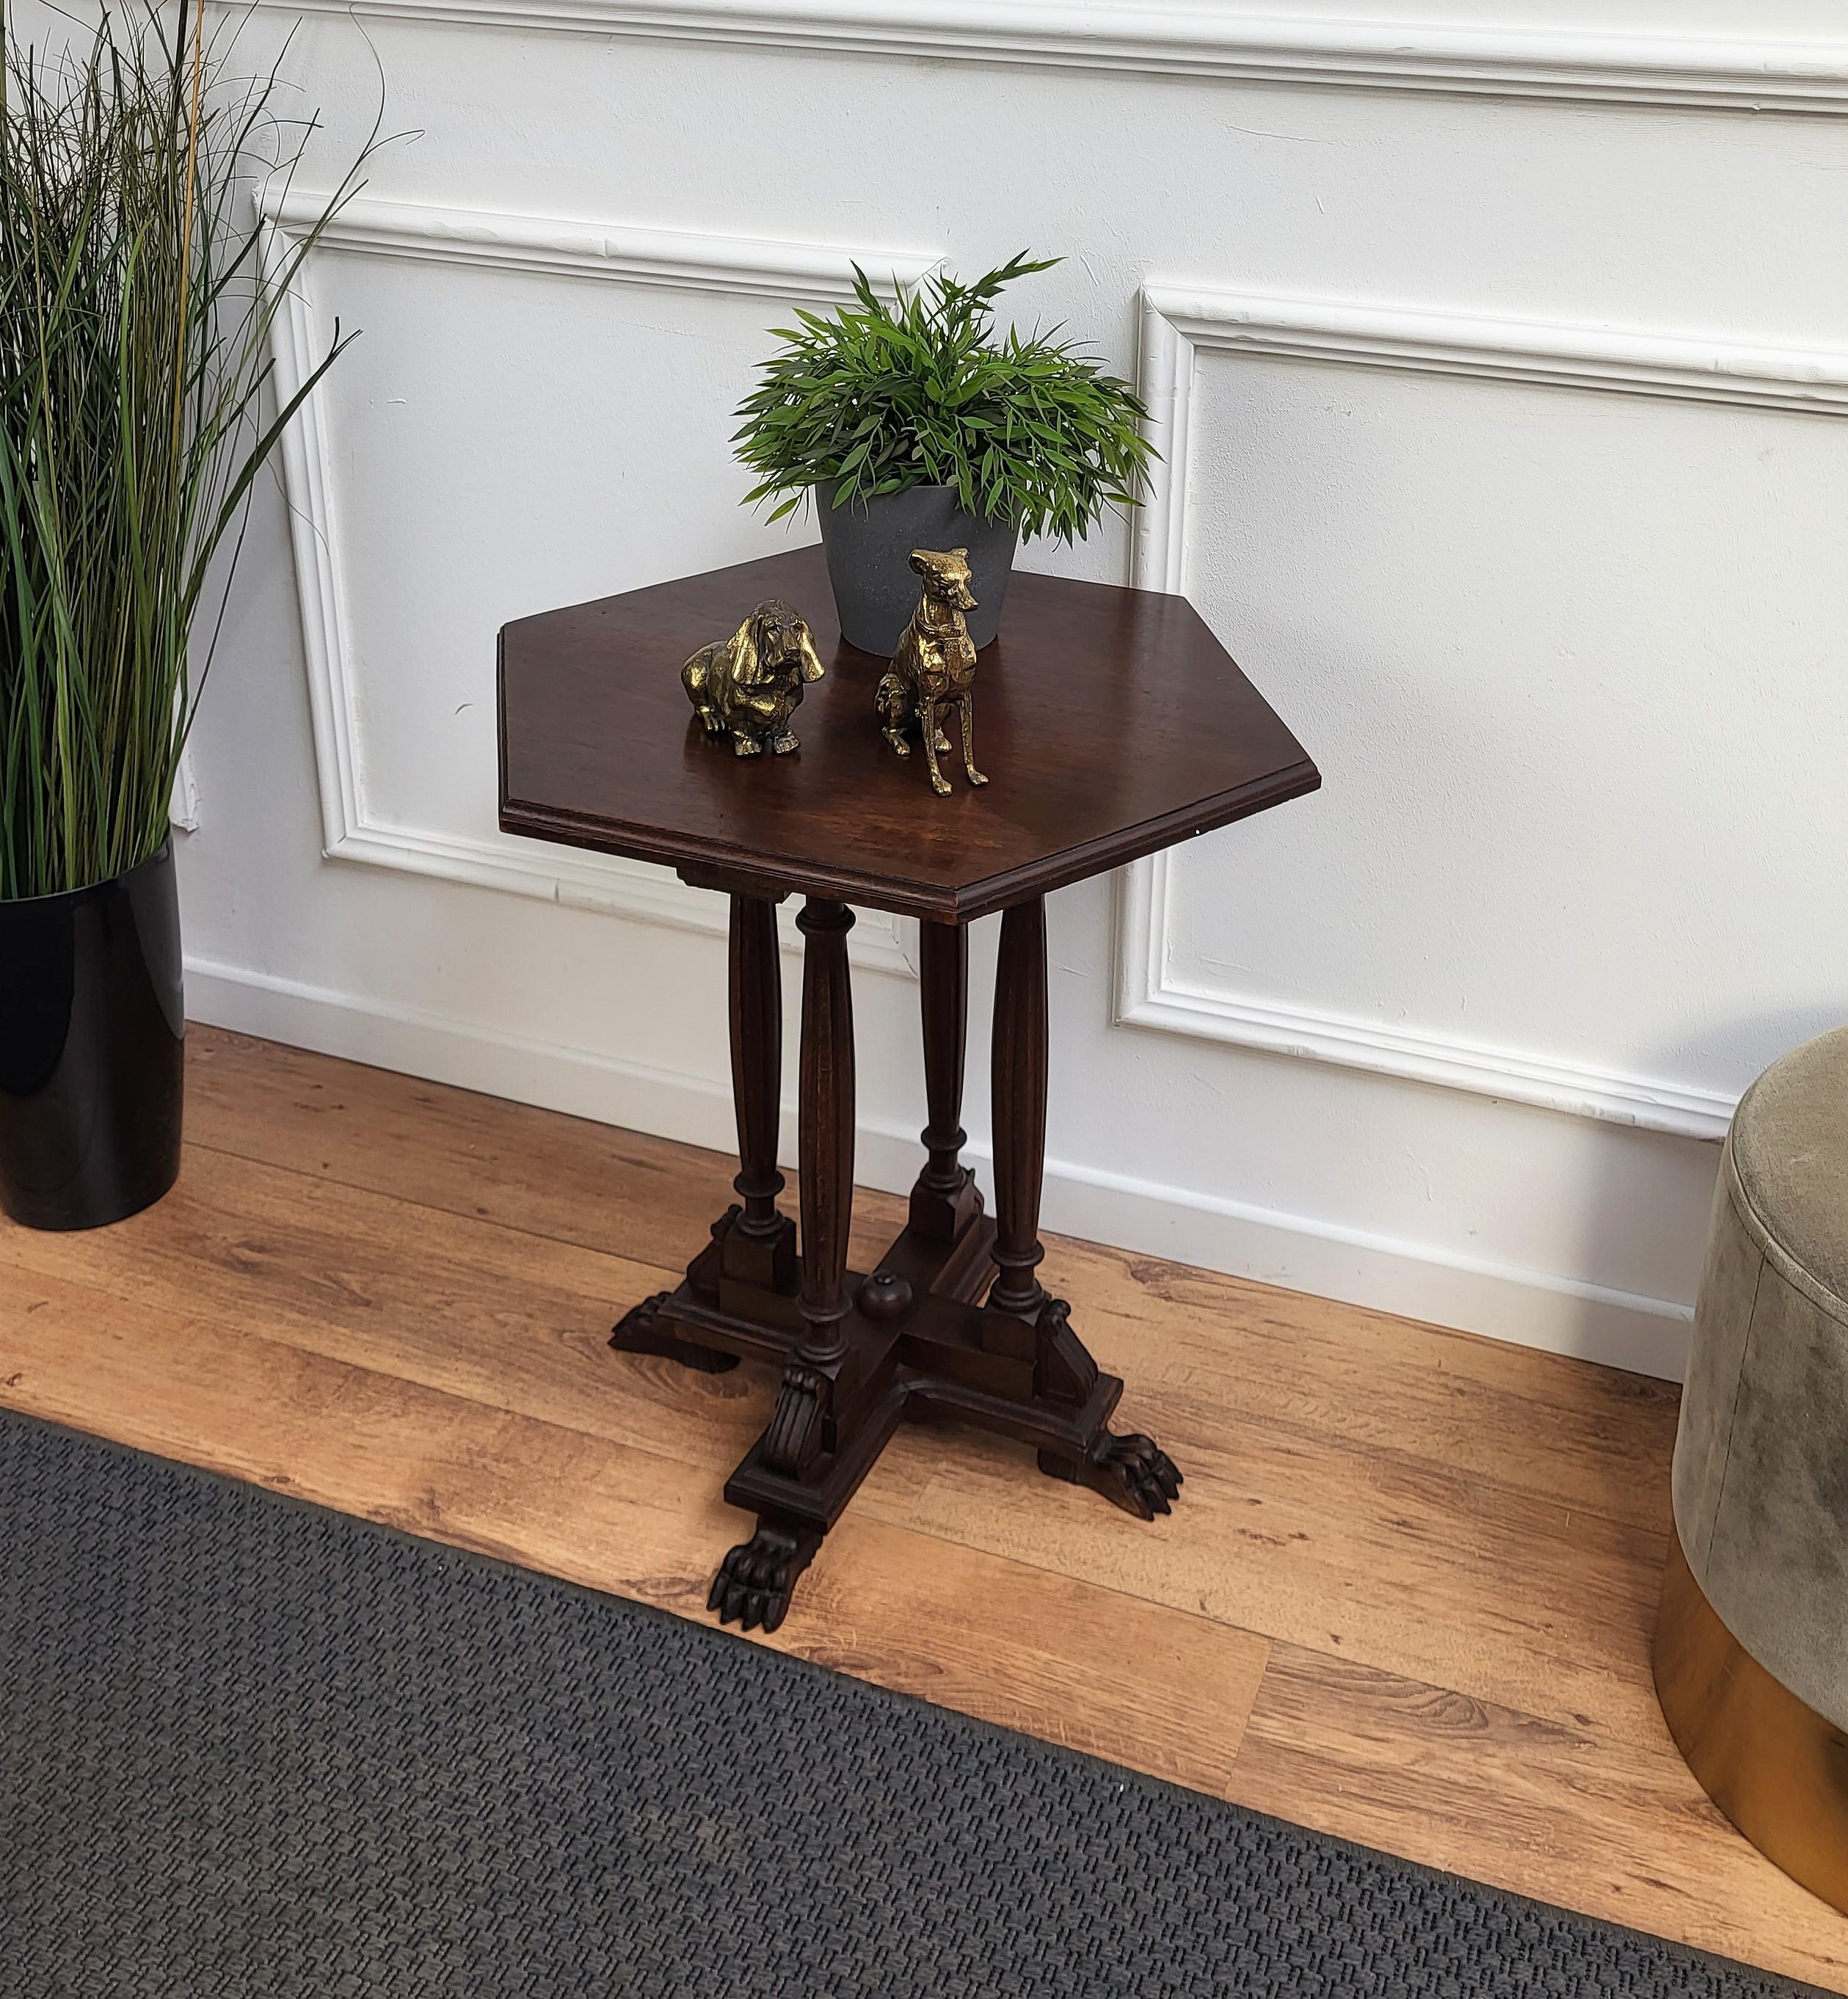 Beautiful antique Italian solid walnut side table or stool features hexagonal top with beveled edges over four beautifully carved legs, connected to one another with central star shaped stretcher and great animal foot ends.
 
This Italian walnut